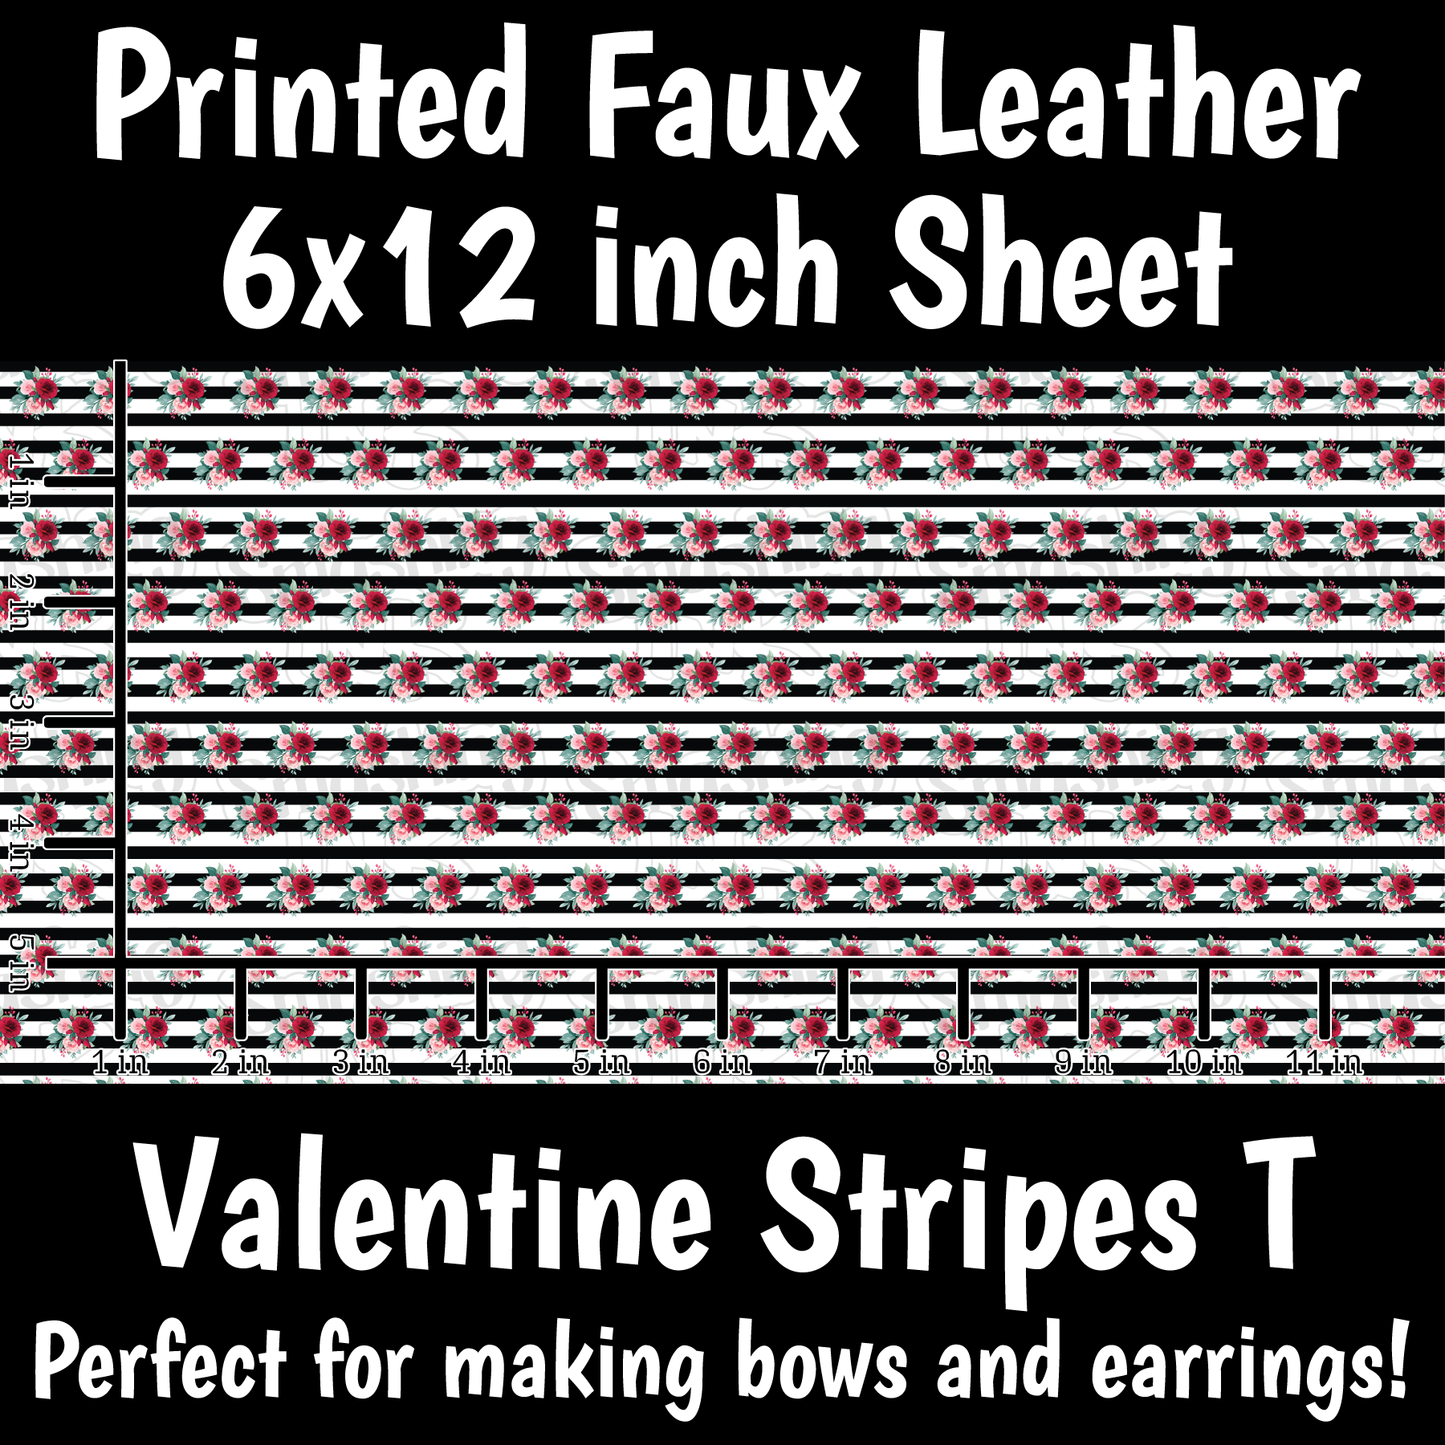 Valentine Stripes T- Faux Leather Sheet (SHIPS IN 3 BUS DAYS)